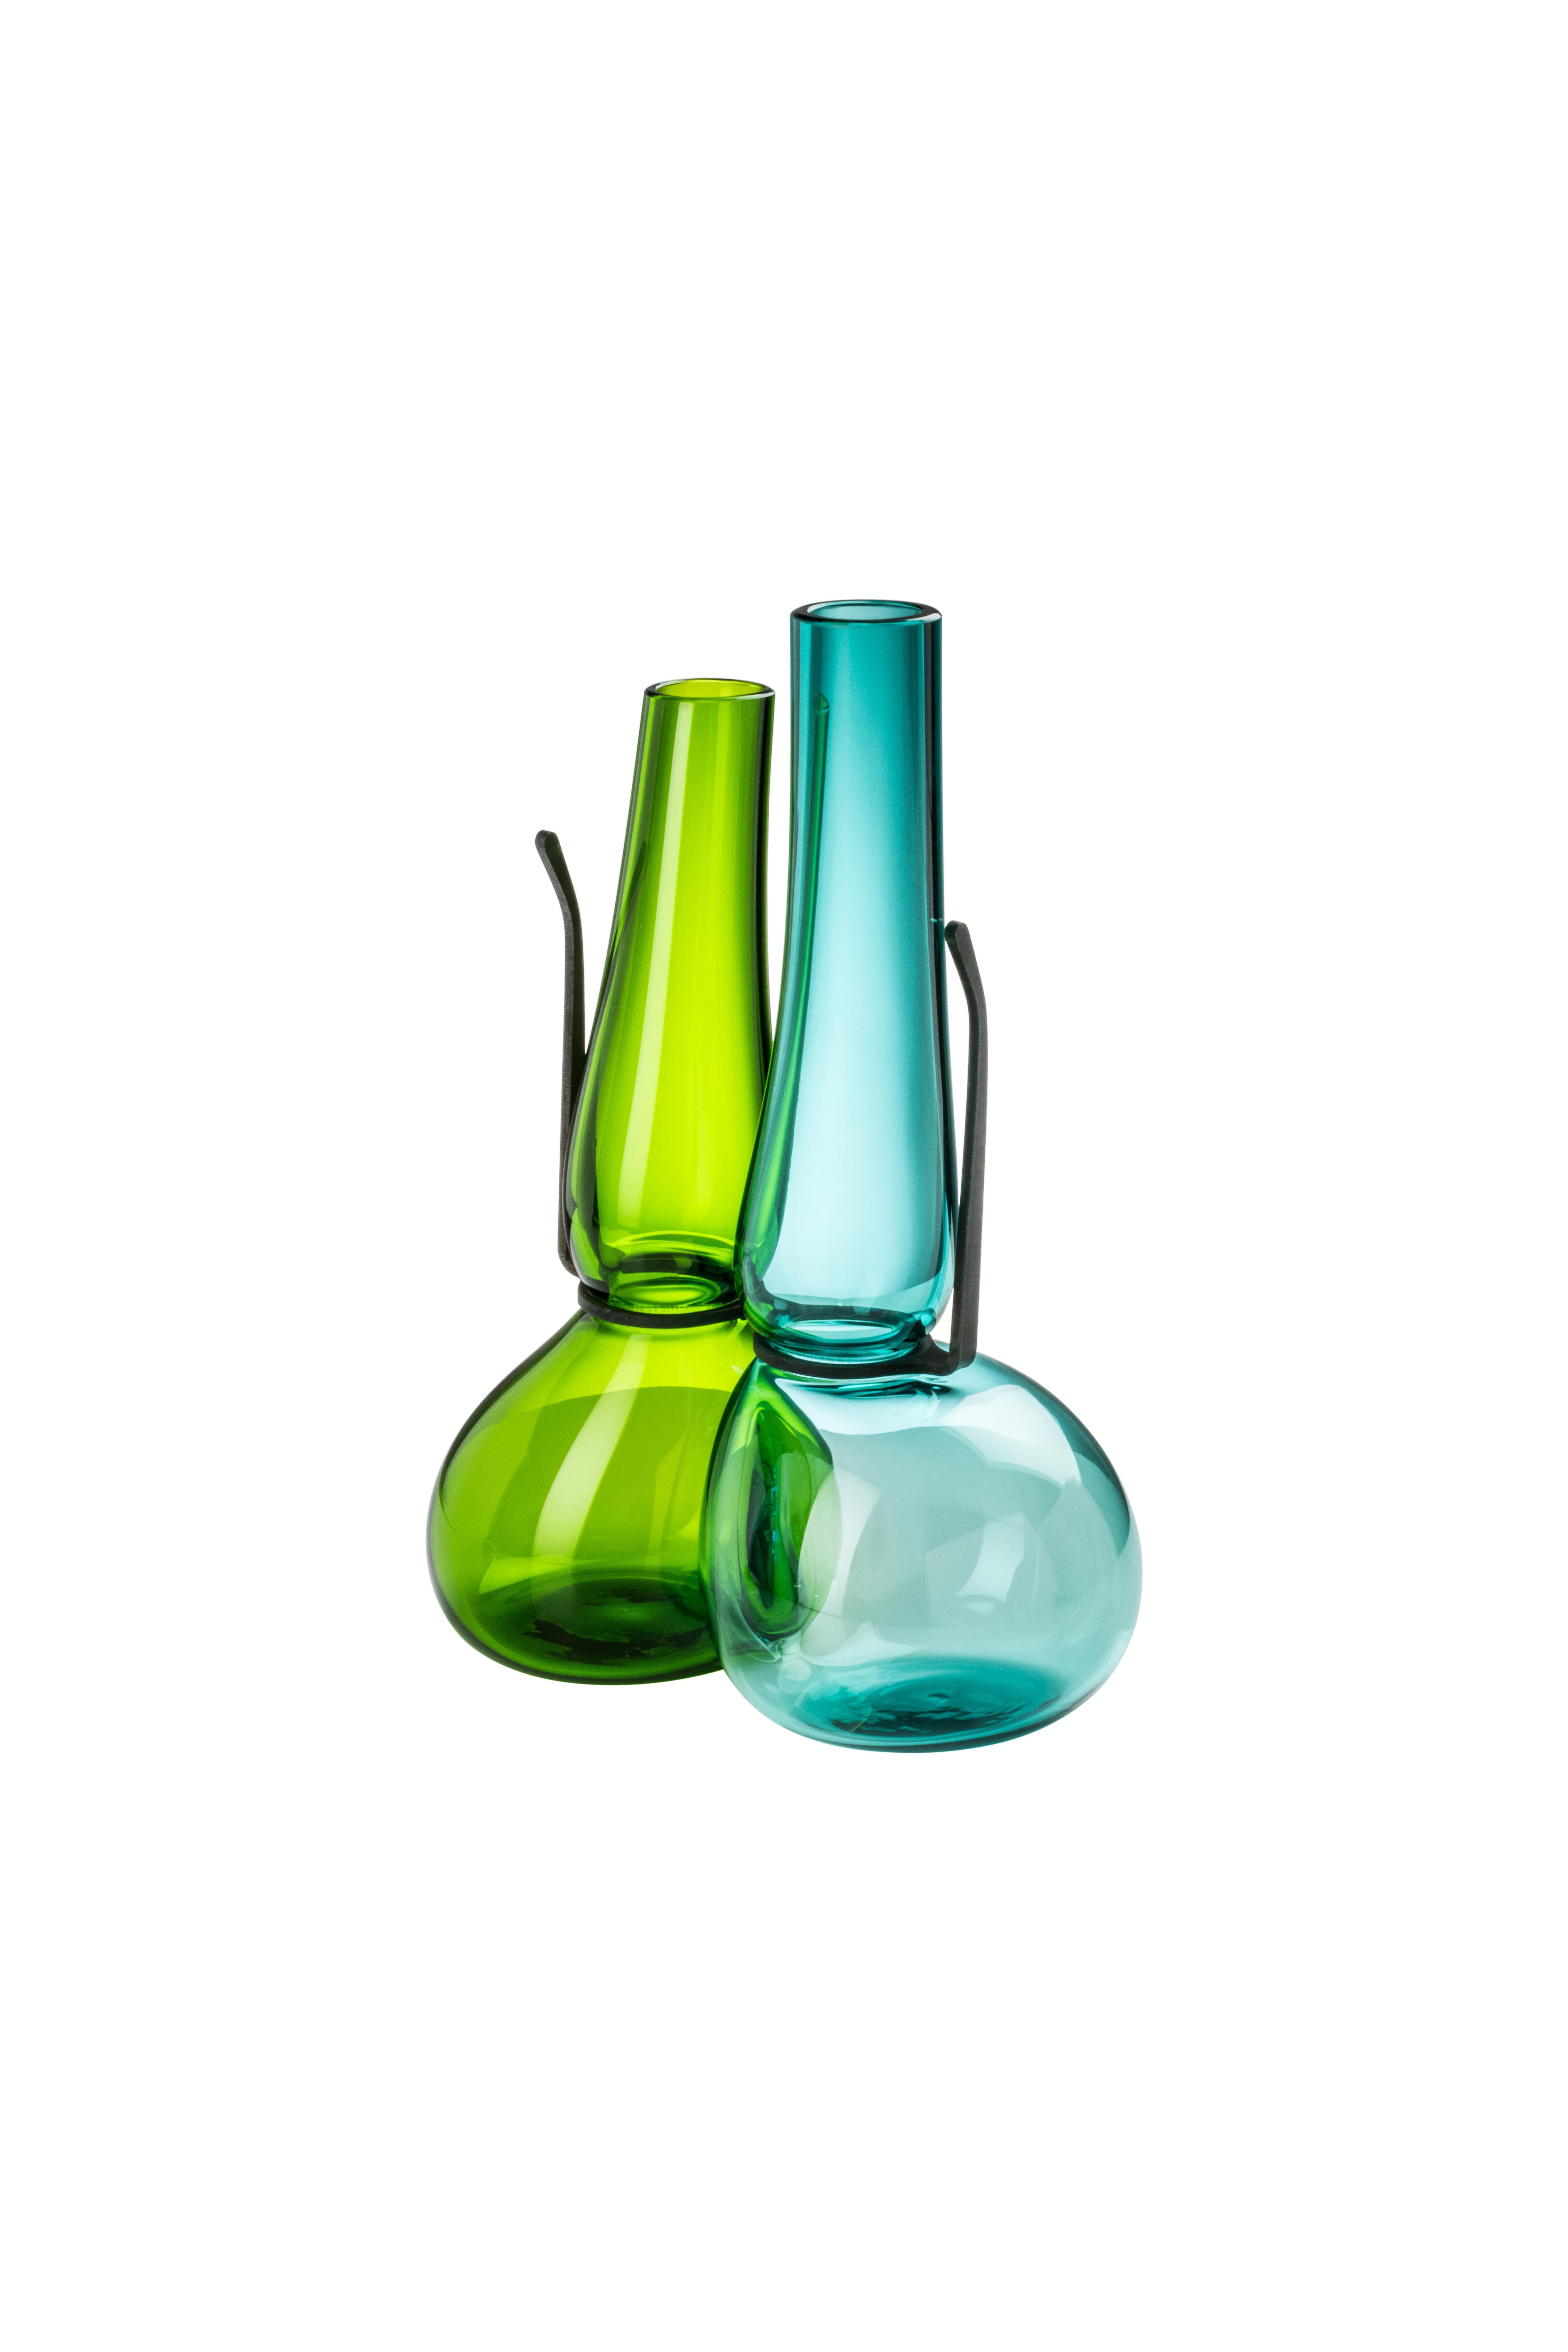 Venini double glass vase in mint green and grass green designed by Ron Arad in 2018. Perfect for indoor home decor as container or statement piece for any room. Also available in other colors on 1stdibs.

Dimensions: 20 cm diameter x cm height.